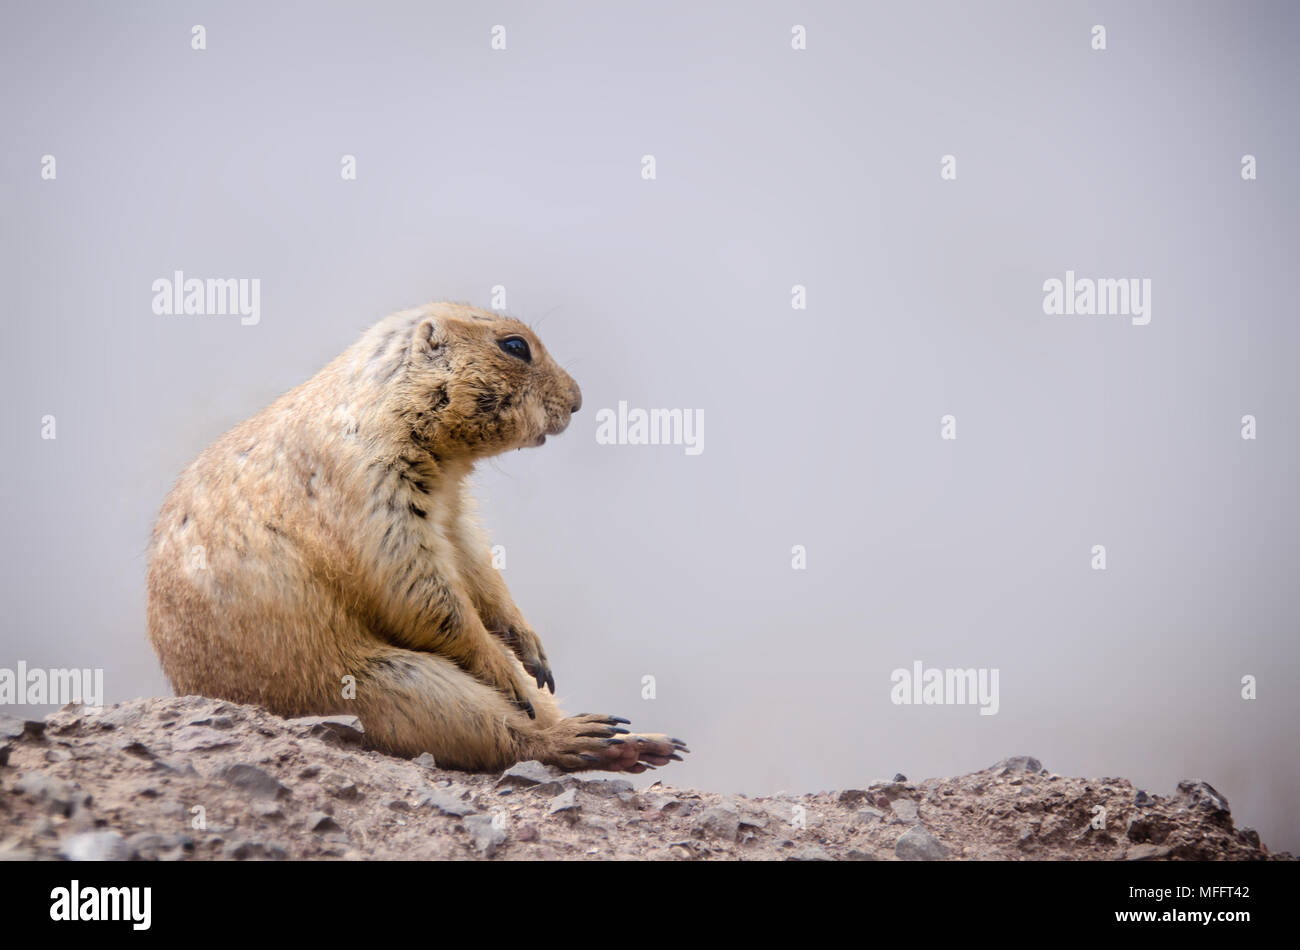 Rodent of the mexican border seated on the rocks in a waiting position. Stock Photo